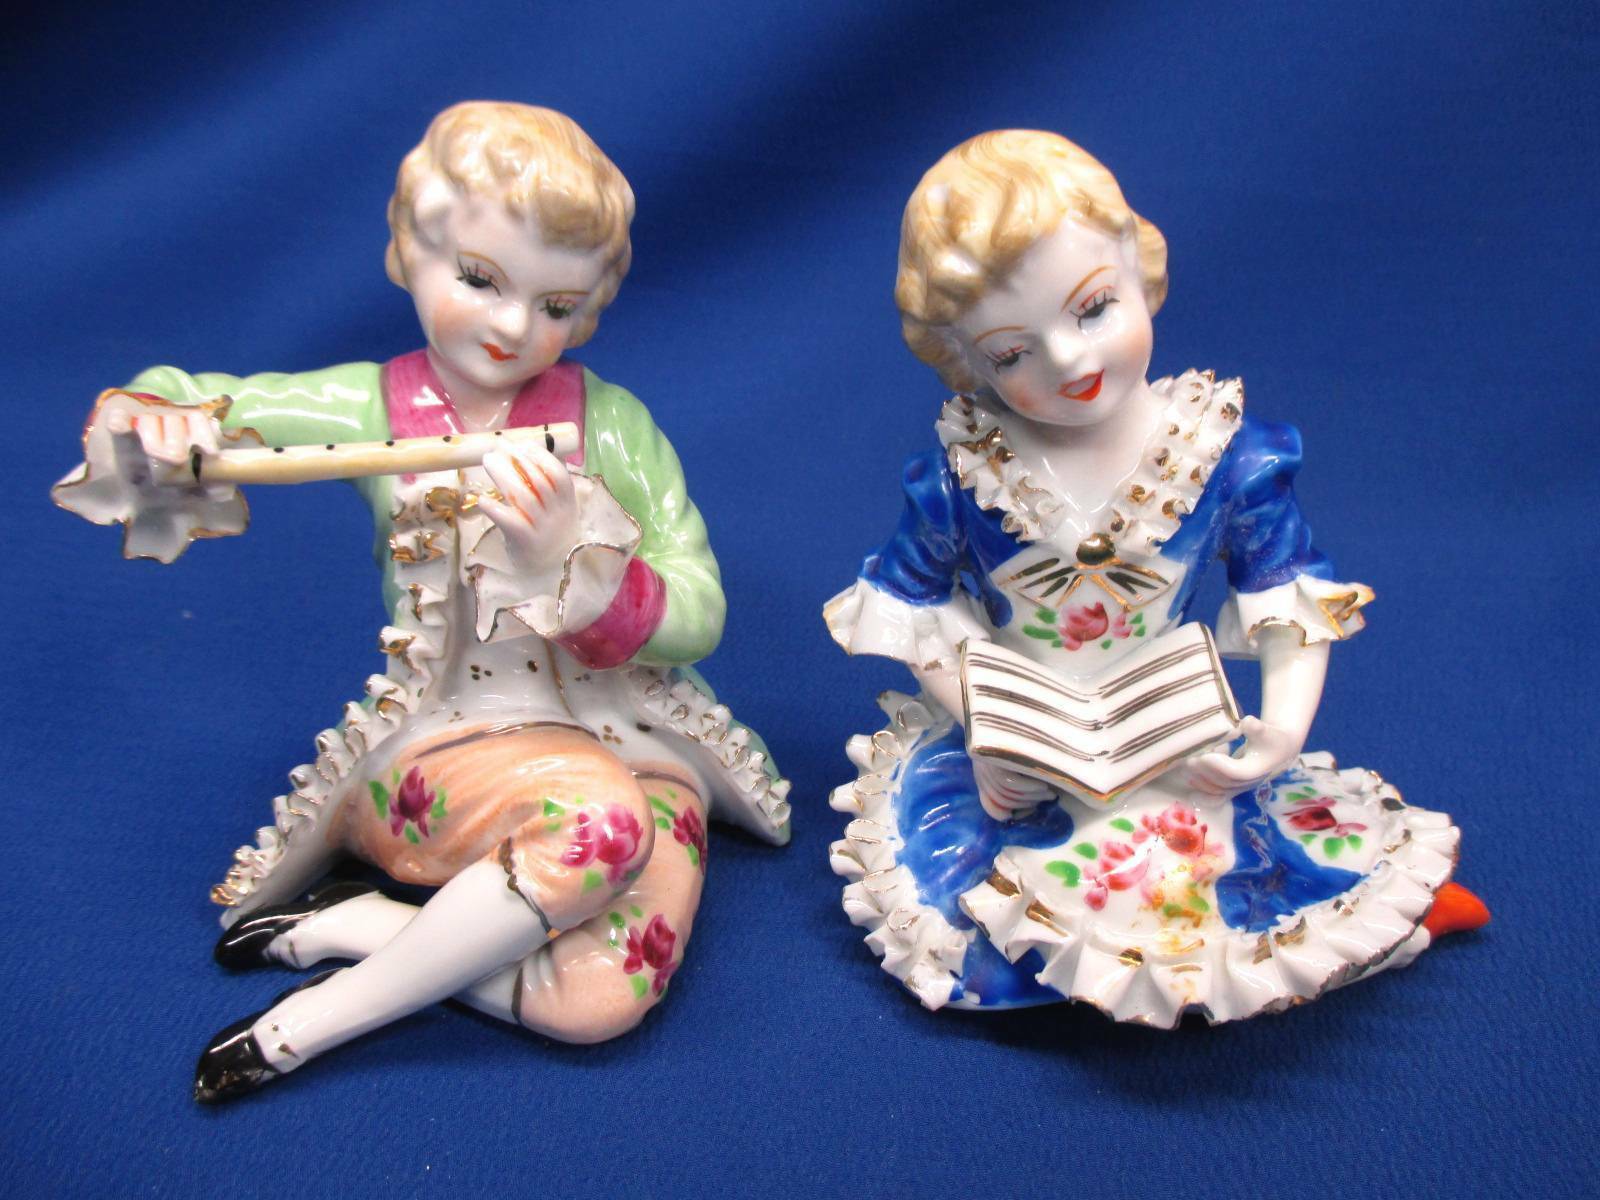 WALES HAND-PAINTED JAPAN PORCELAIN BOY & GIRL FIGURINES IN 18TH CENTURY DRESS